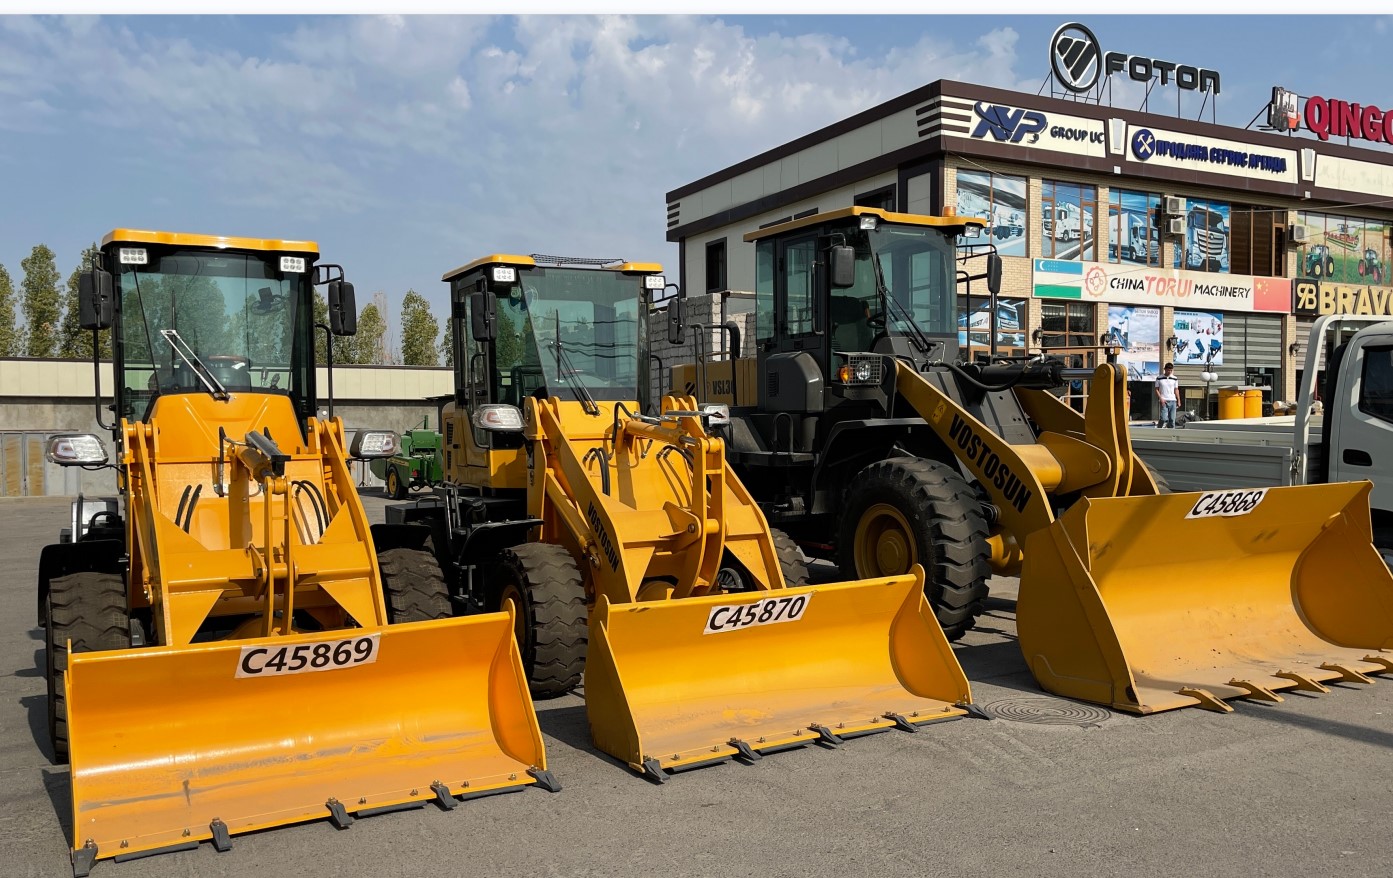 Wheel Loaders and Trucks are in stock in our oversea branch office